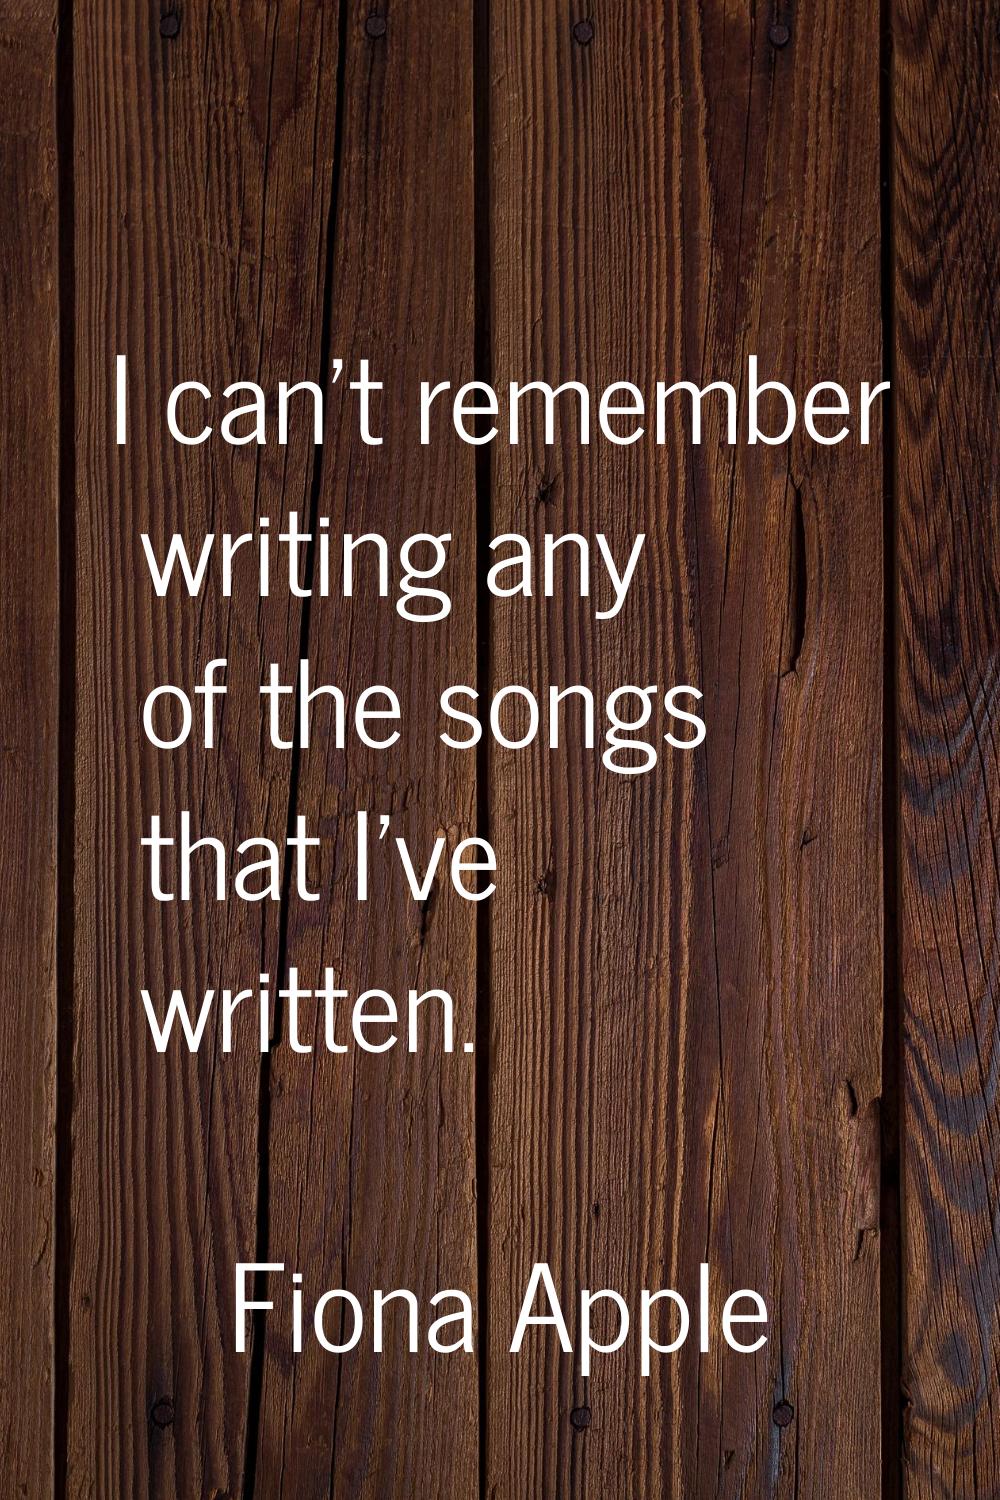 I can't remember writing any of the songs that I've written.